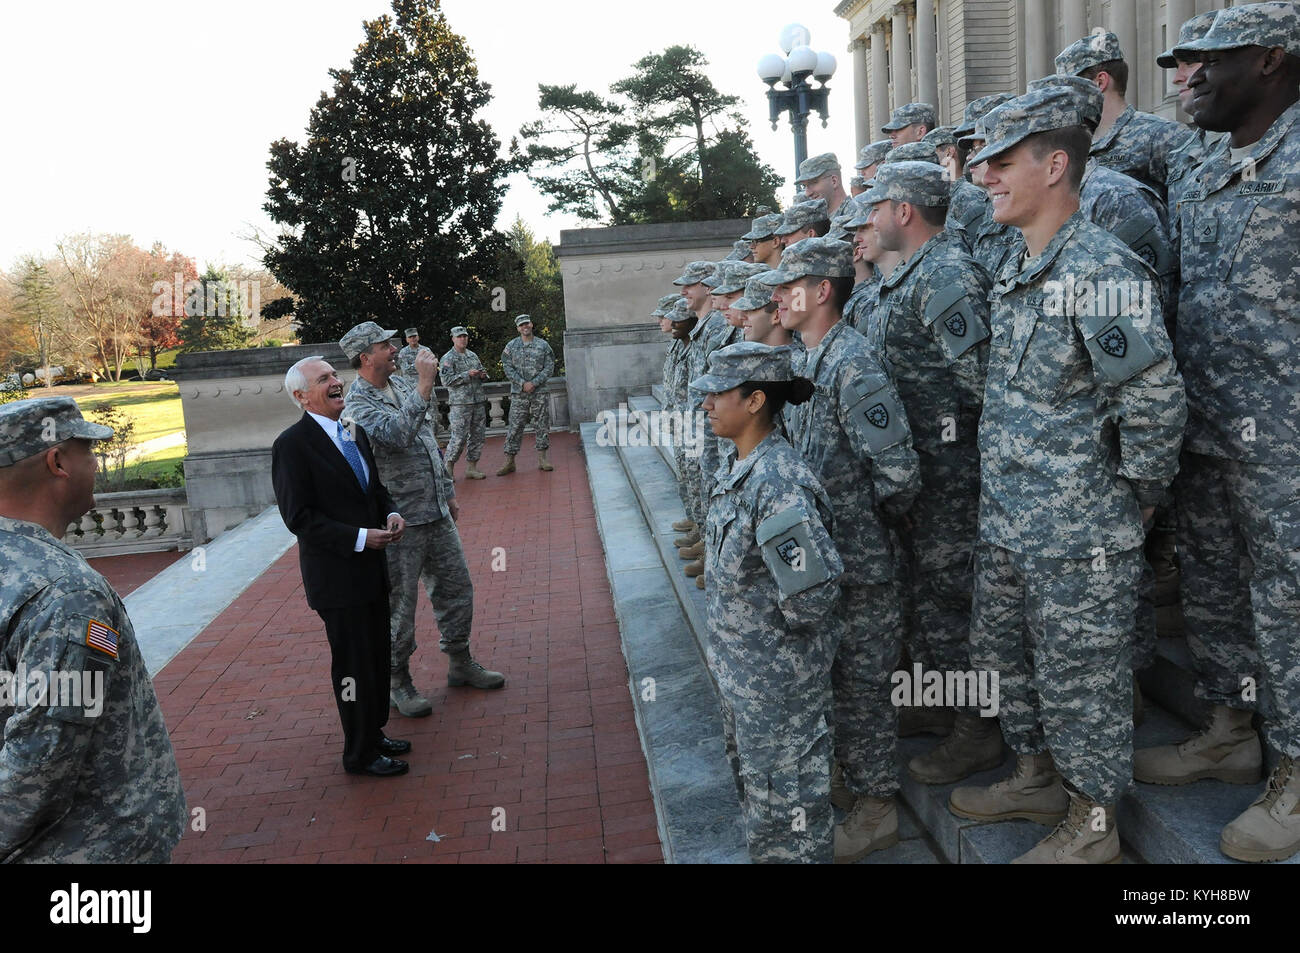 Kentucky Governor, Steve Beshear and the Adjutant General, Maj. Gen. Edward W. Tonini, laugh with new Kentucky Guard recruits on the steps of the State Capitol in Frankfort, Ky., Nov. 20, 2012. (Kentucky National Guard photo by Sgt. Scott Raymond) Stock Photo